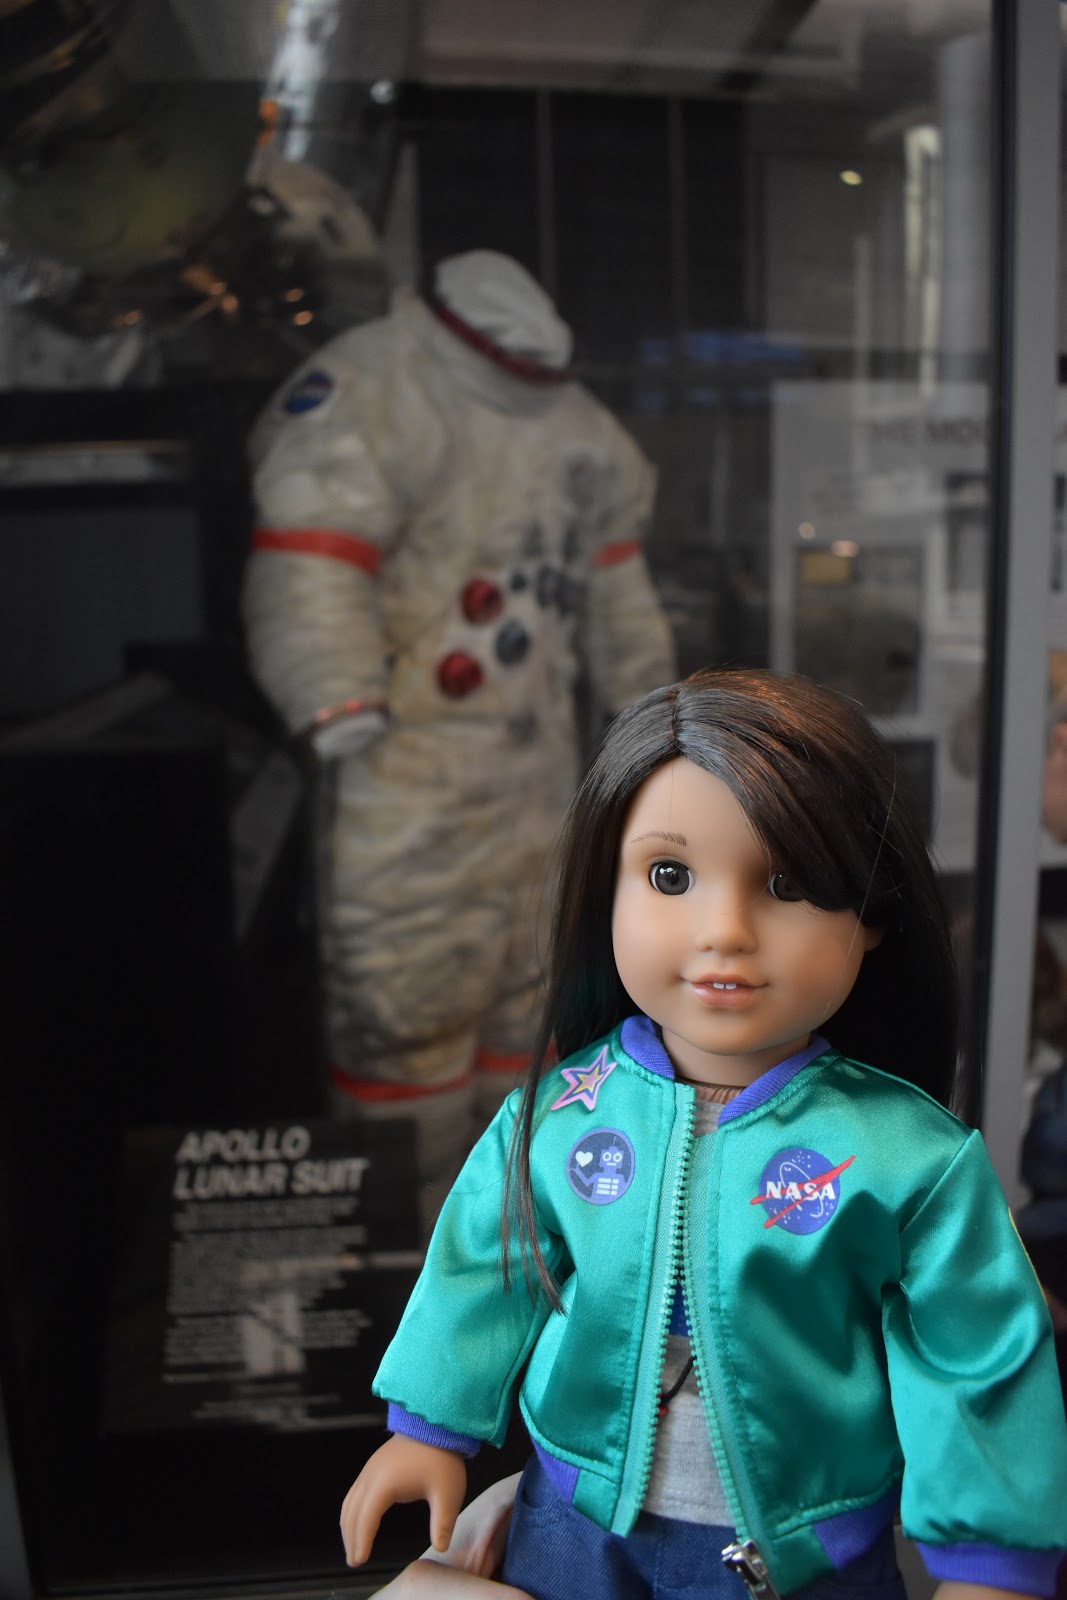 A Peek into the Pantry: Luciana, the National Air and Space Museum, and ...